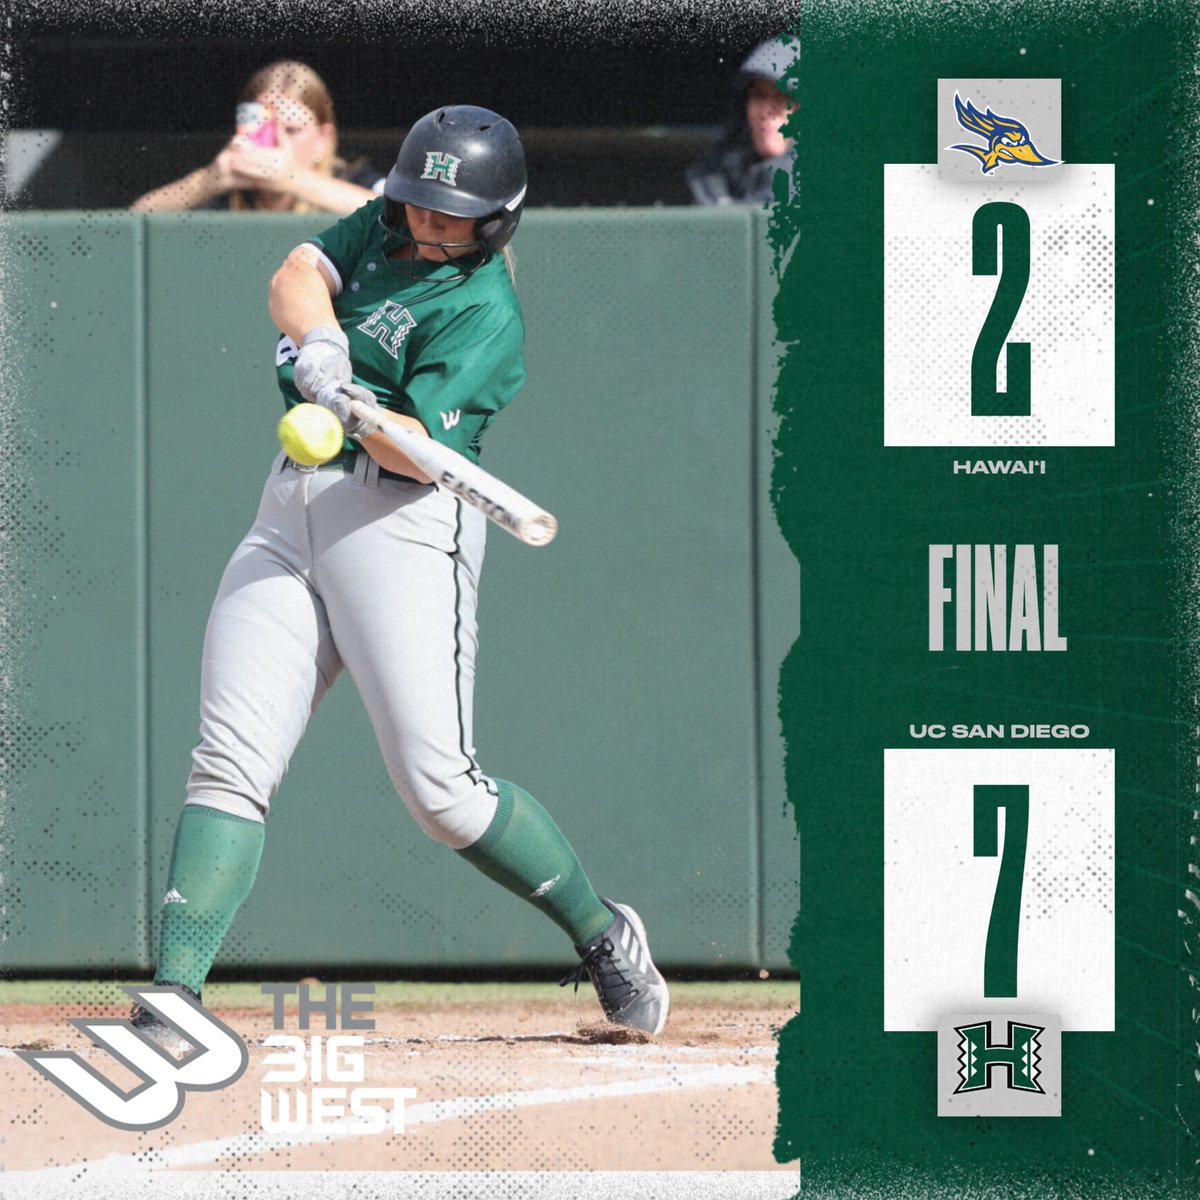 #HawaiiSB WINS! UH downs Cal State Bakersfield, 7-2 W: Campbell-Pua S: Borges L: Martinez